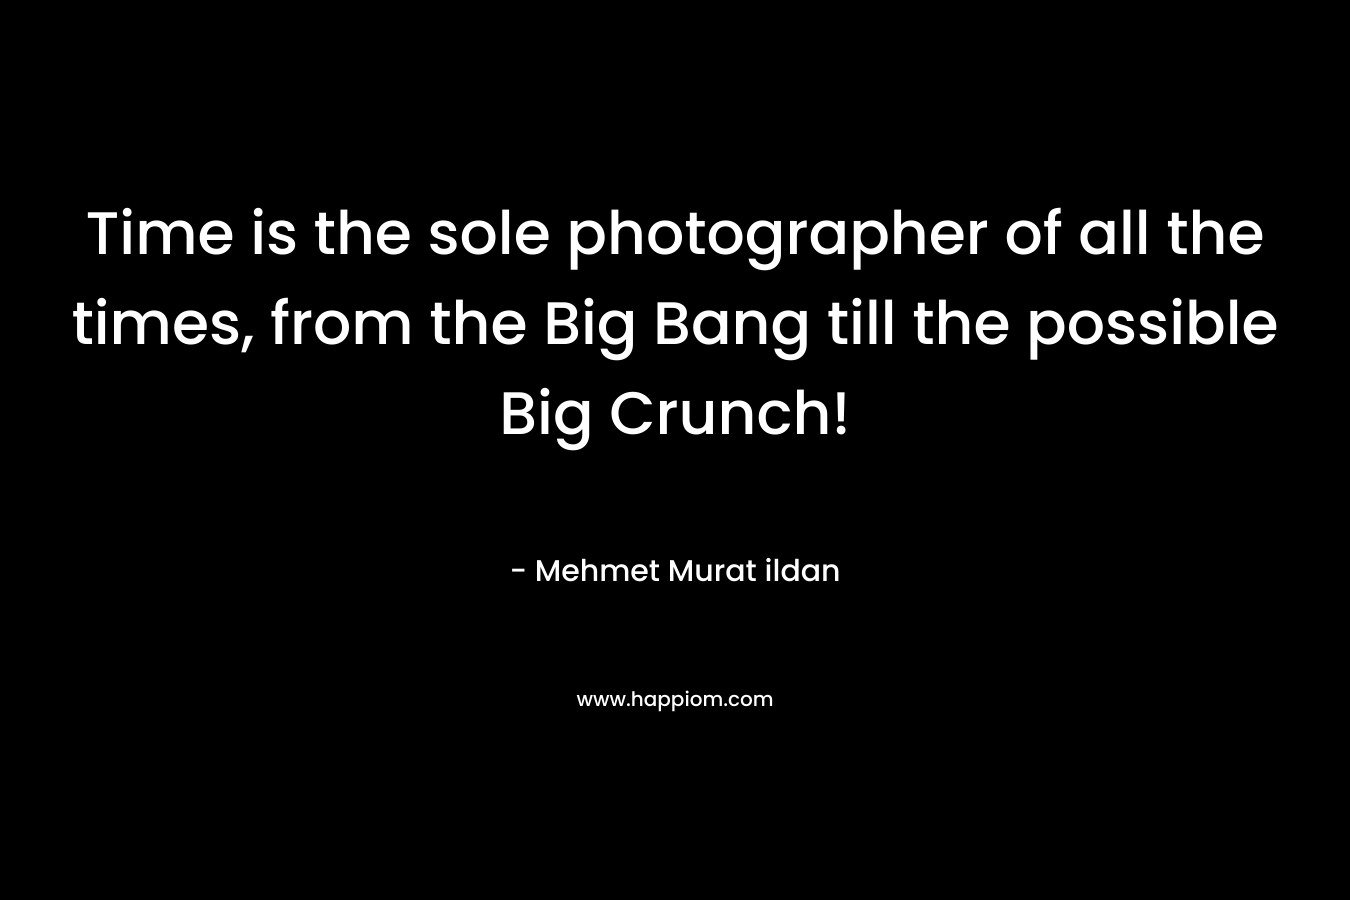 Time is the sole photographer of all the times, from the Big Bang till the possible Big Crunch! – Mehmet Murat ildan